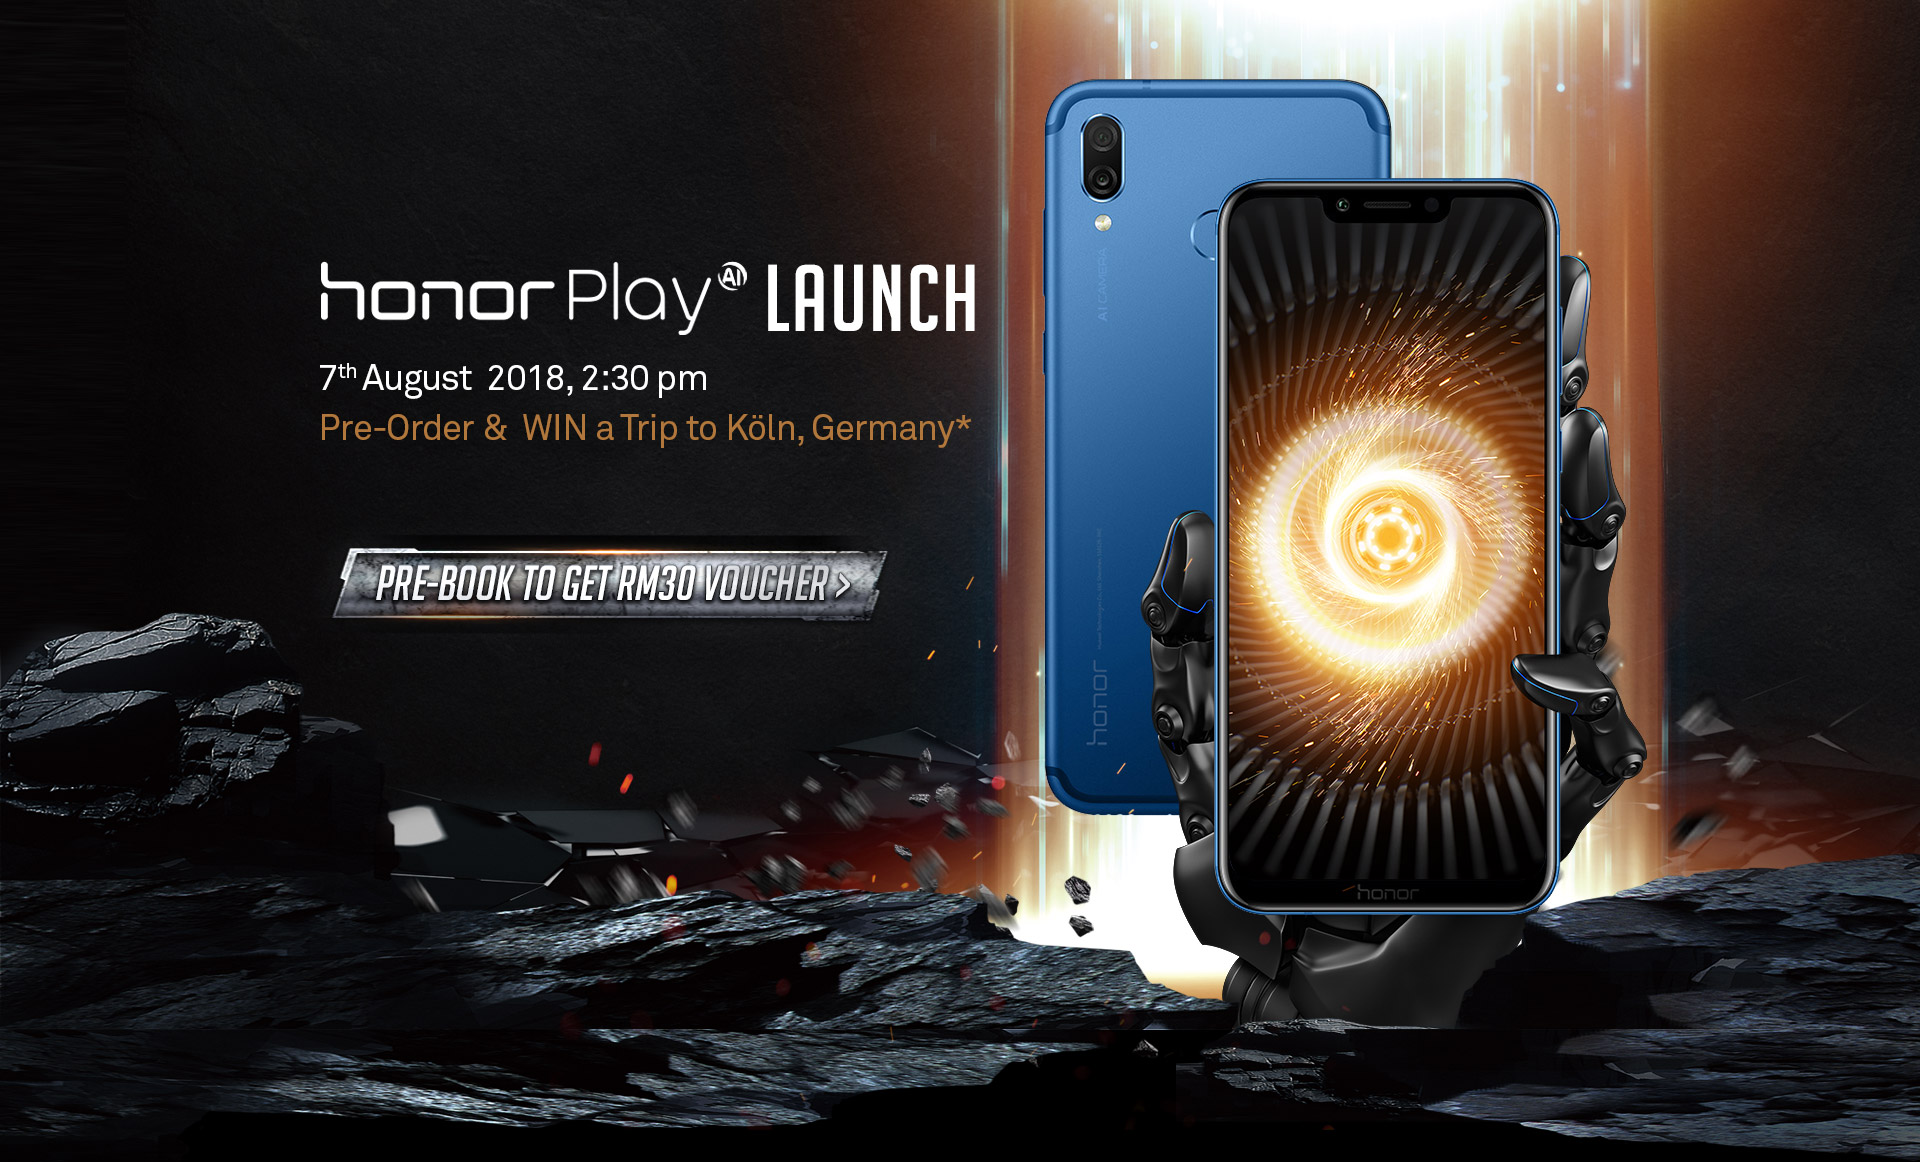 Get a free RM30 for pre-booking the honor Play and a chance to win a free trip to Germany